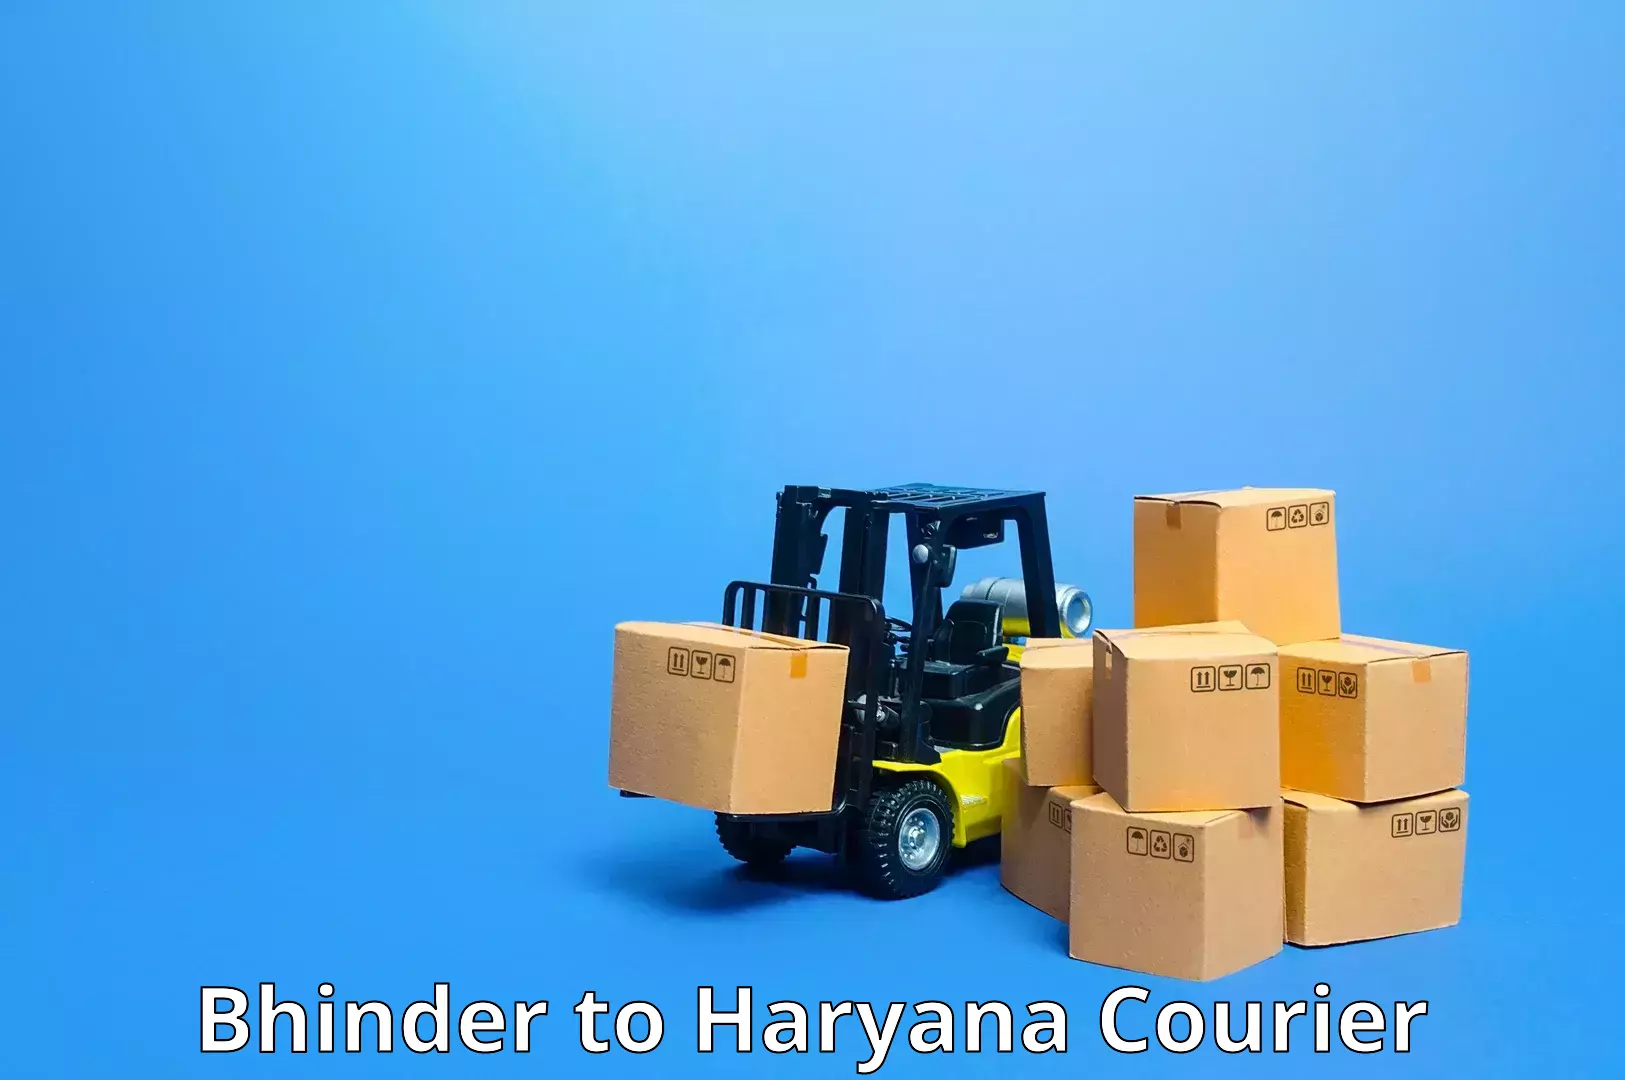 Advanced parcel tracking Bhinder to NCR Haryana